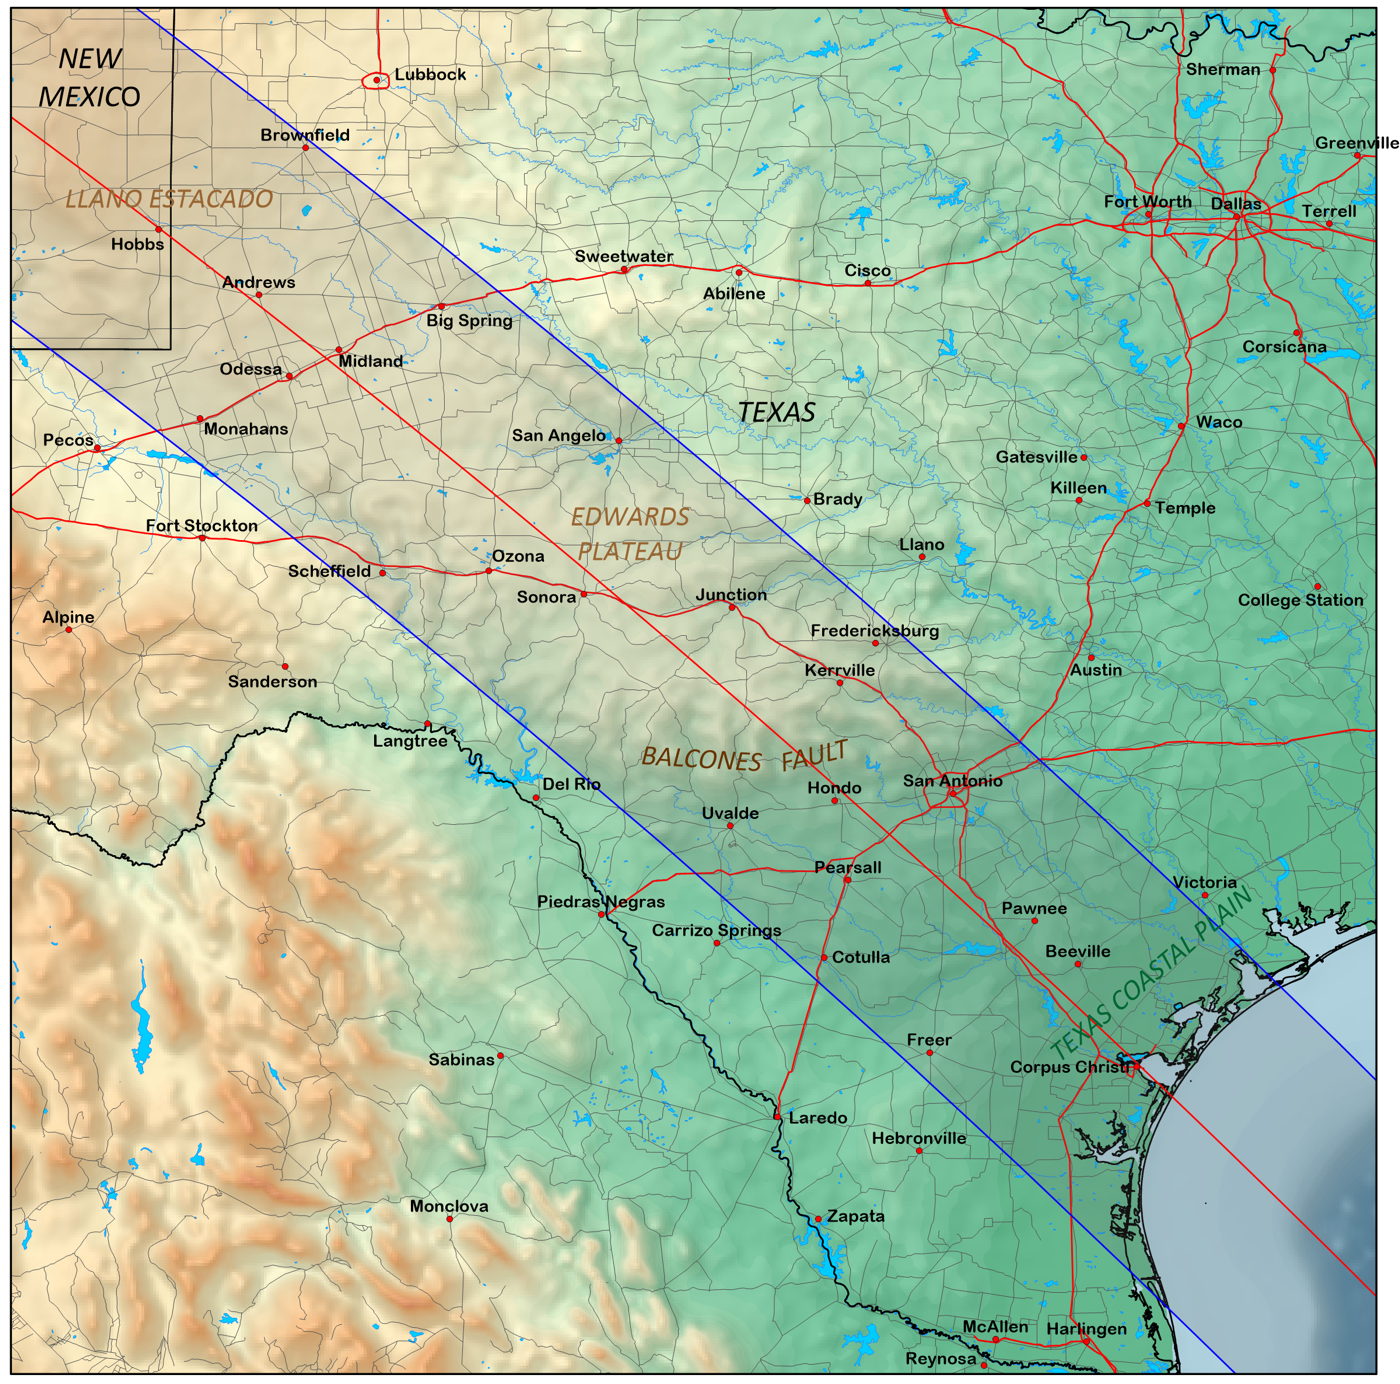 Topographical Map of Eclipse Path Through Texas